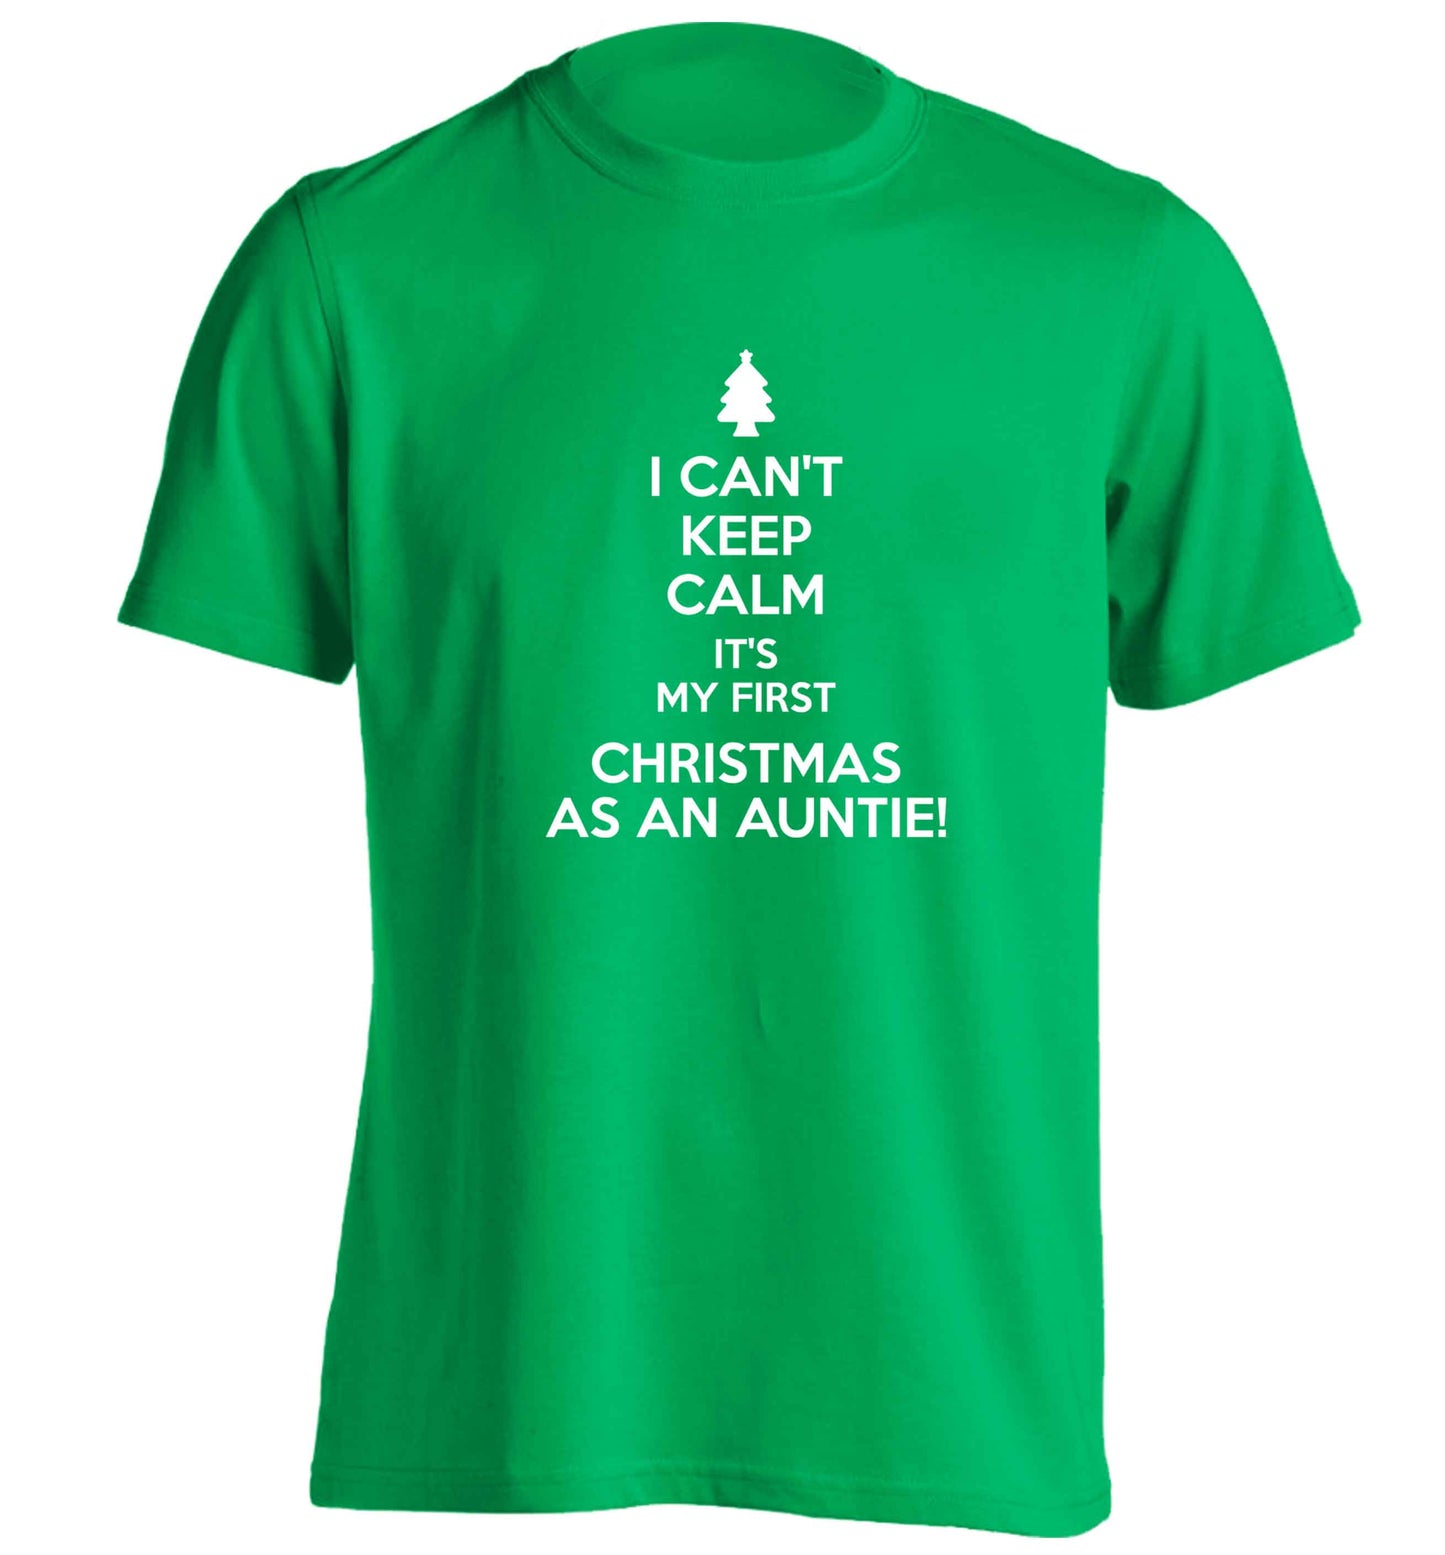 I can't keep calm it's my first Christmas as an auntie! adults unisex green Tshirt 2XL